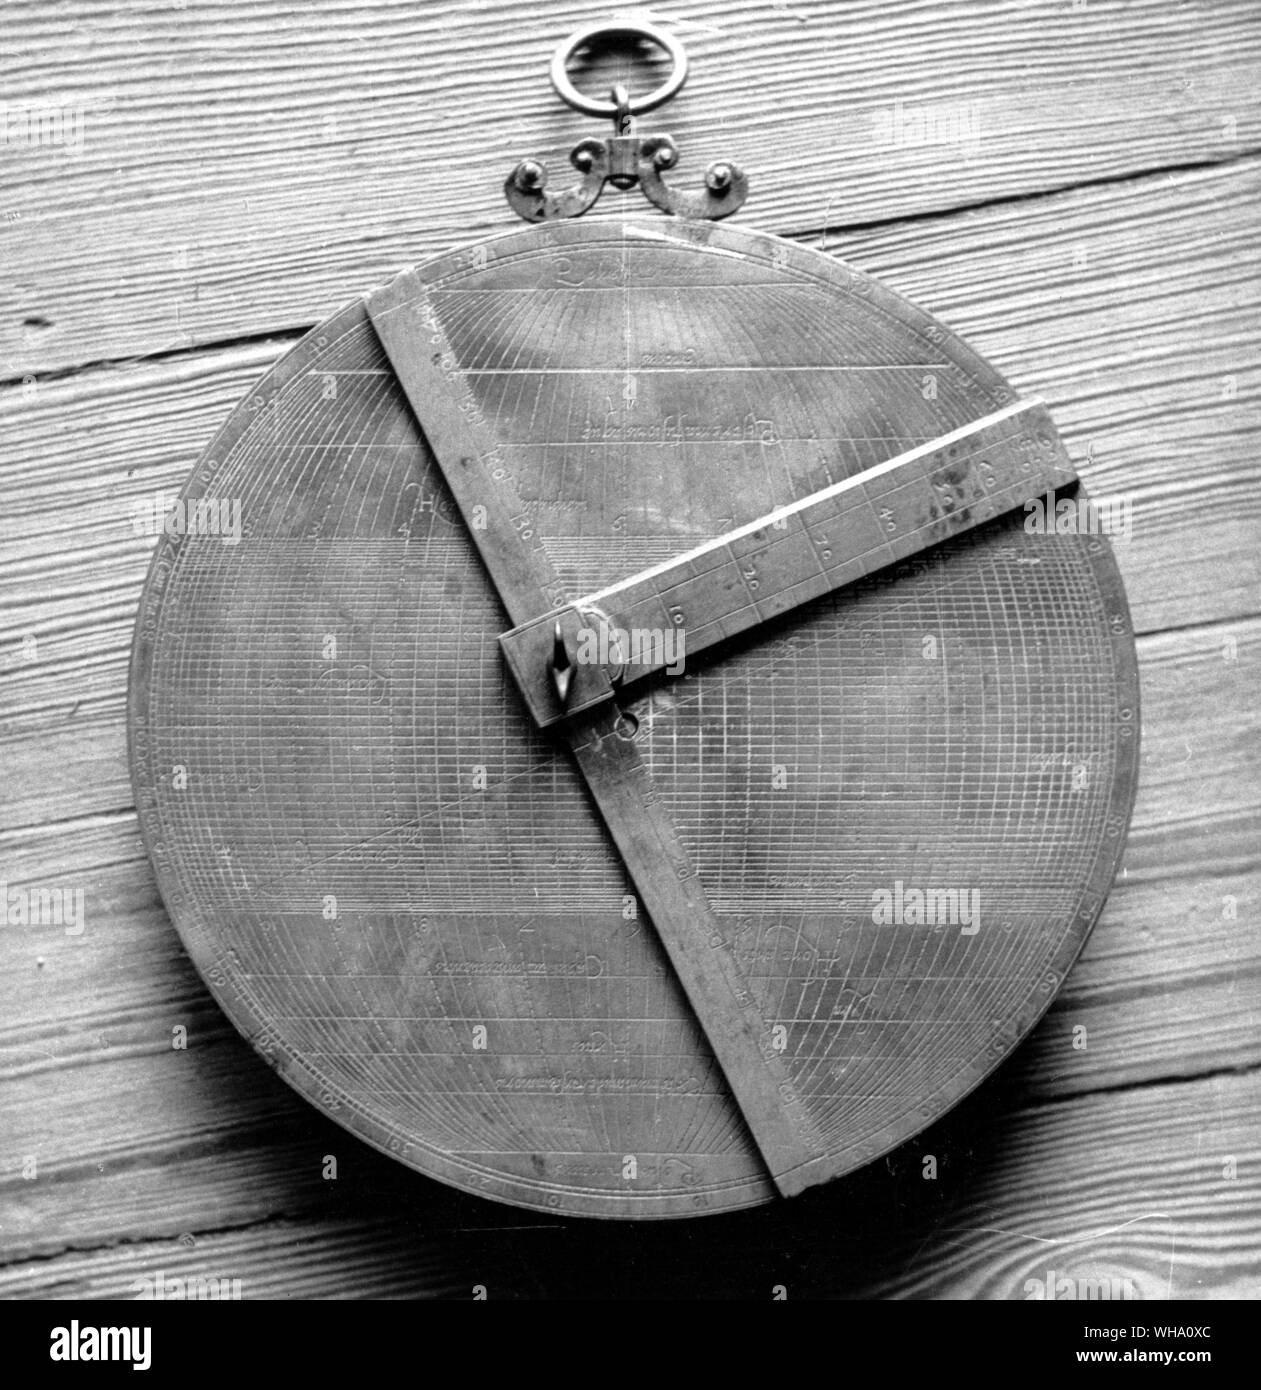 Porguguese astrolabe - An Astrolabe is an ancient, multi-purpose, astronomical instrument. It can be used to solve numerous problems involving the position of celestial objects, simple surveying and to tell the time. There are three distinct types of astrolabe; planispheric, universal and mariners. Stock Photo